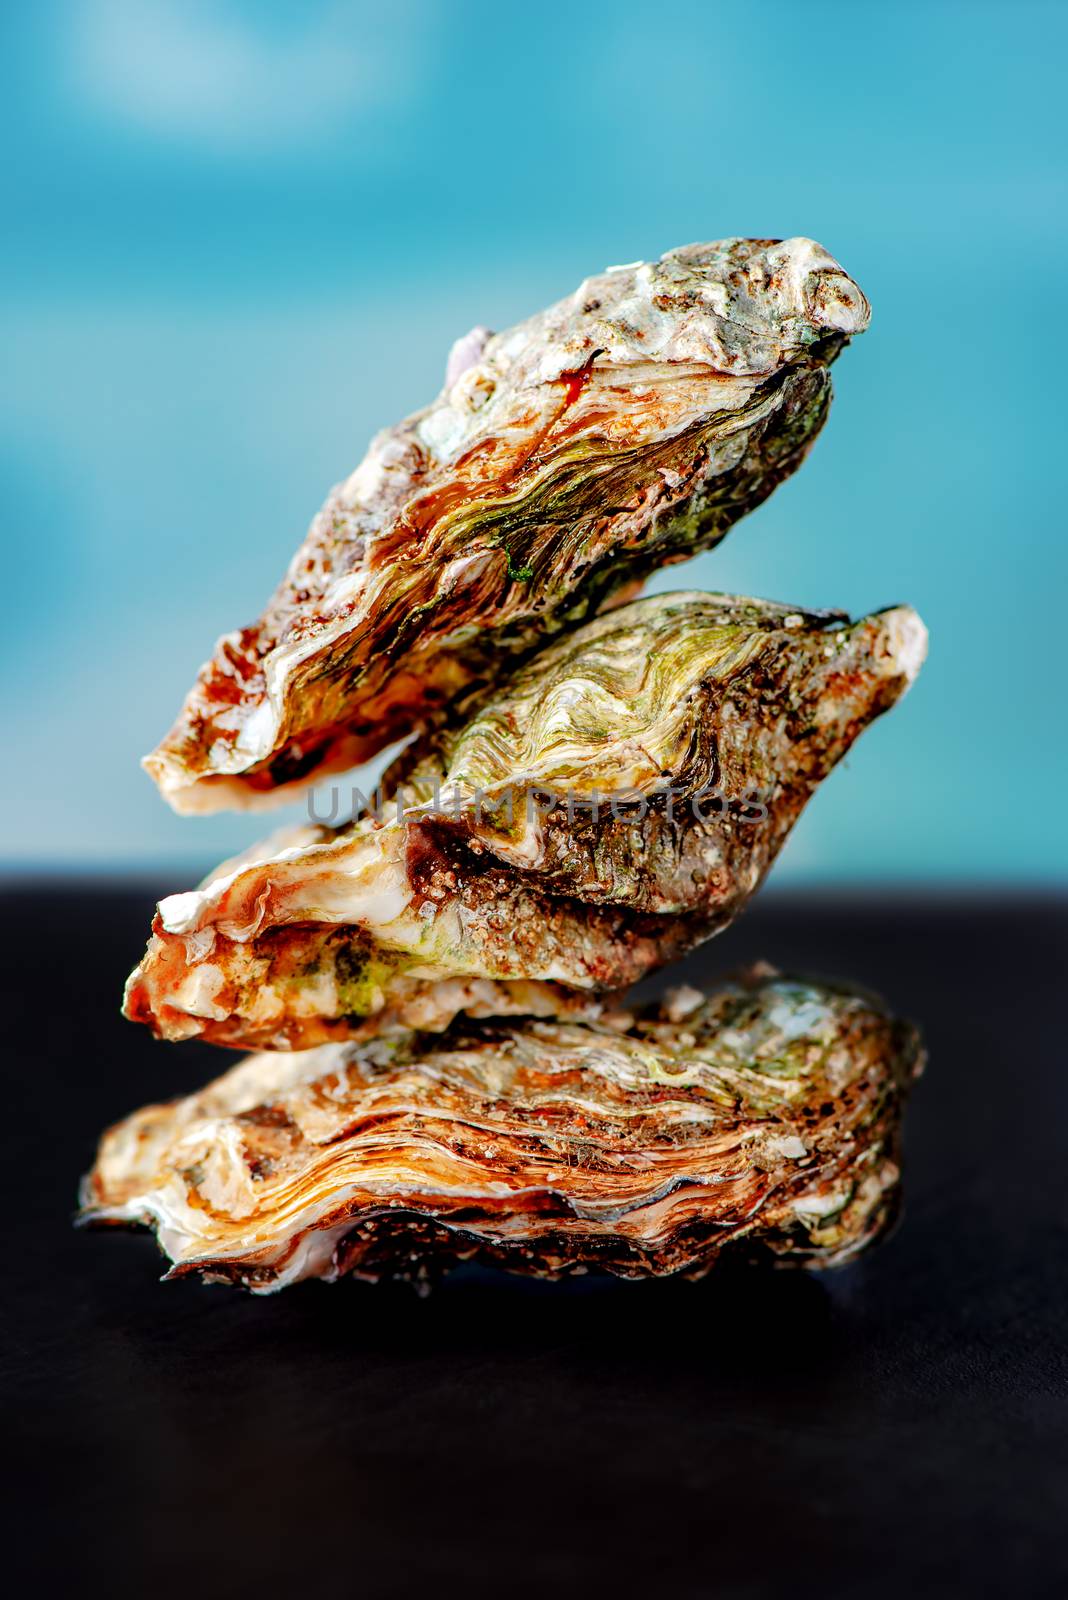 Raw oysters on stone surface